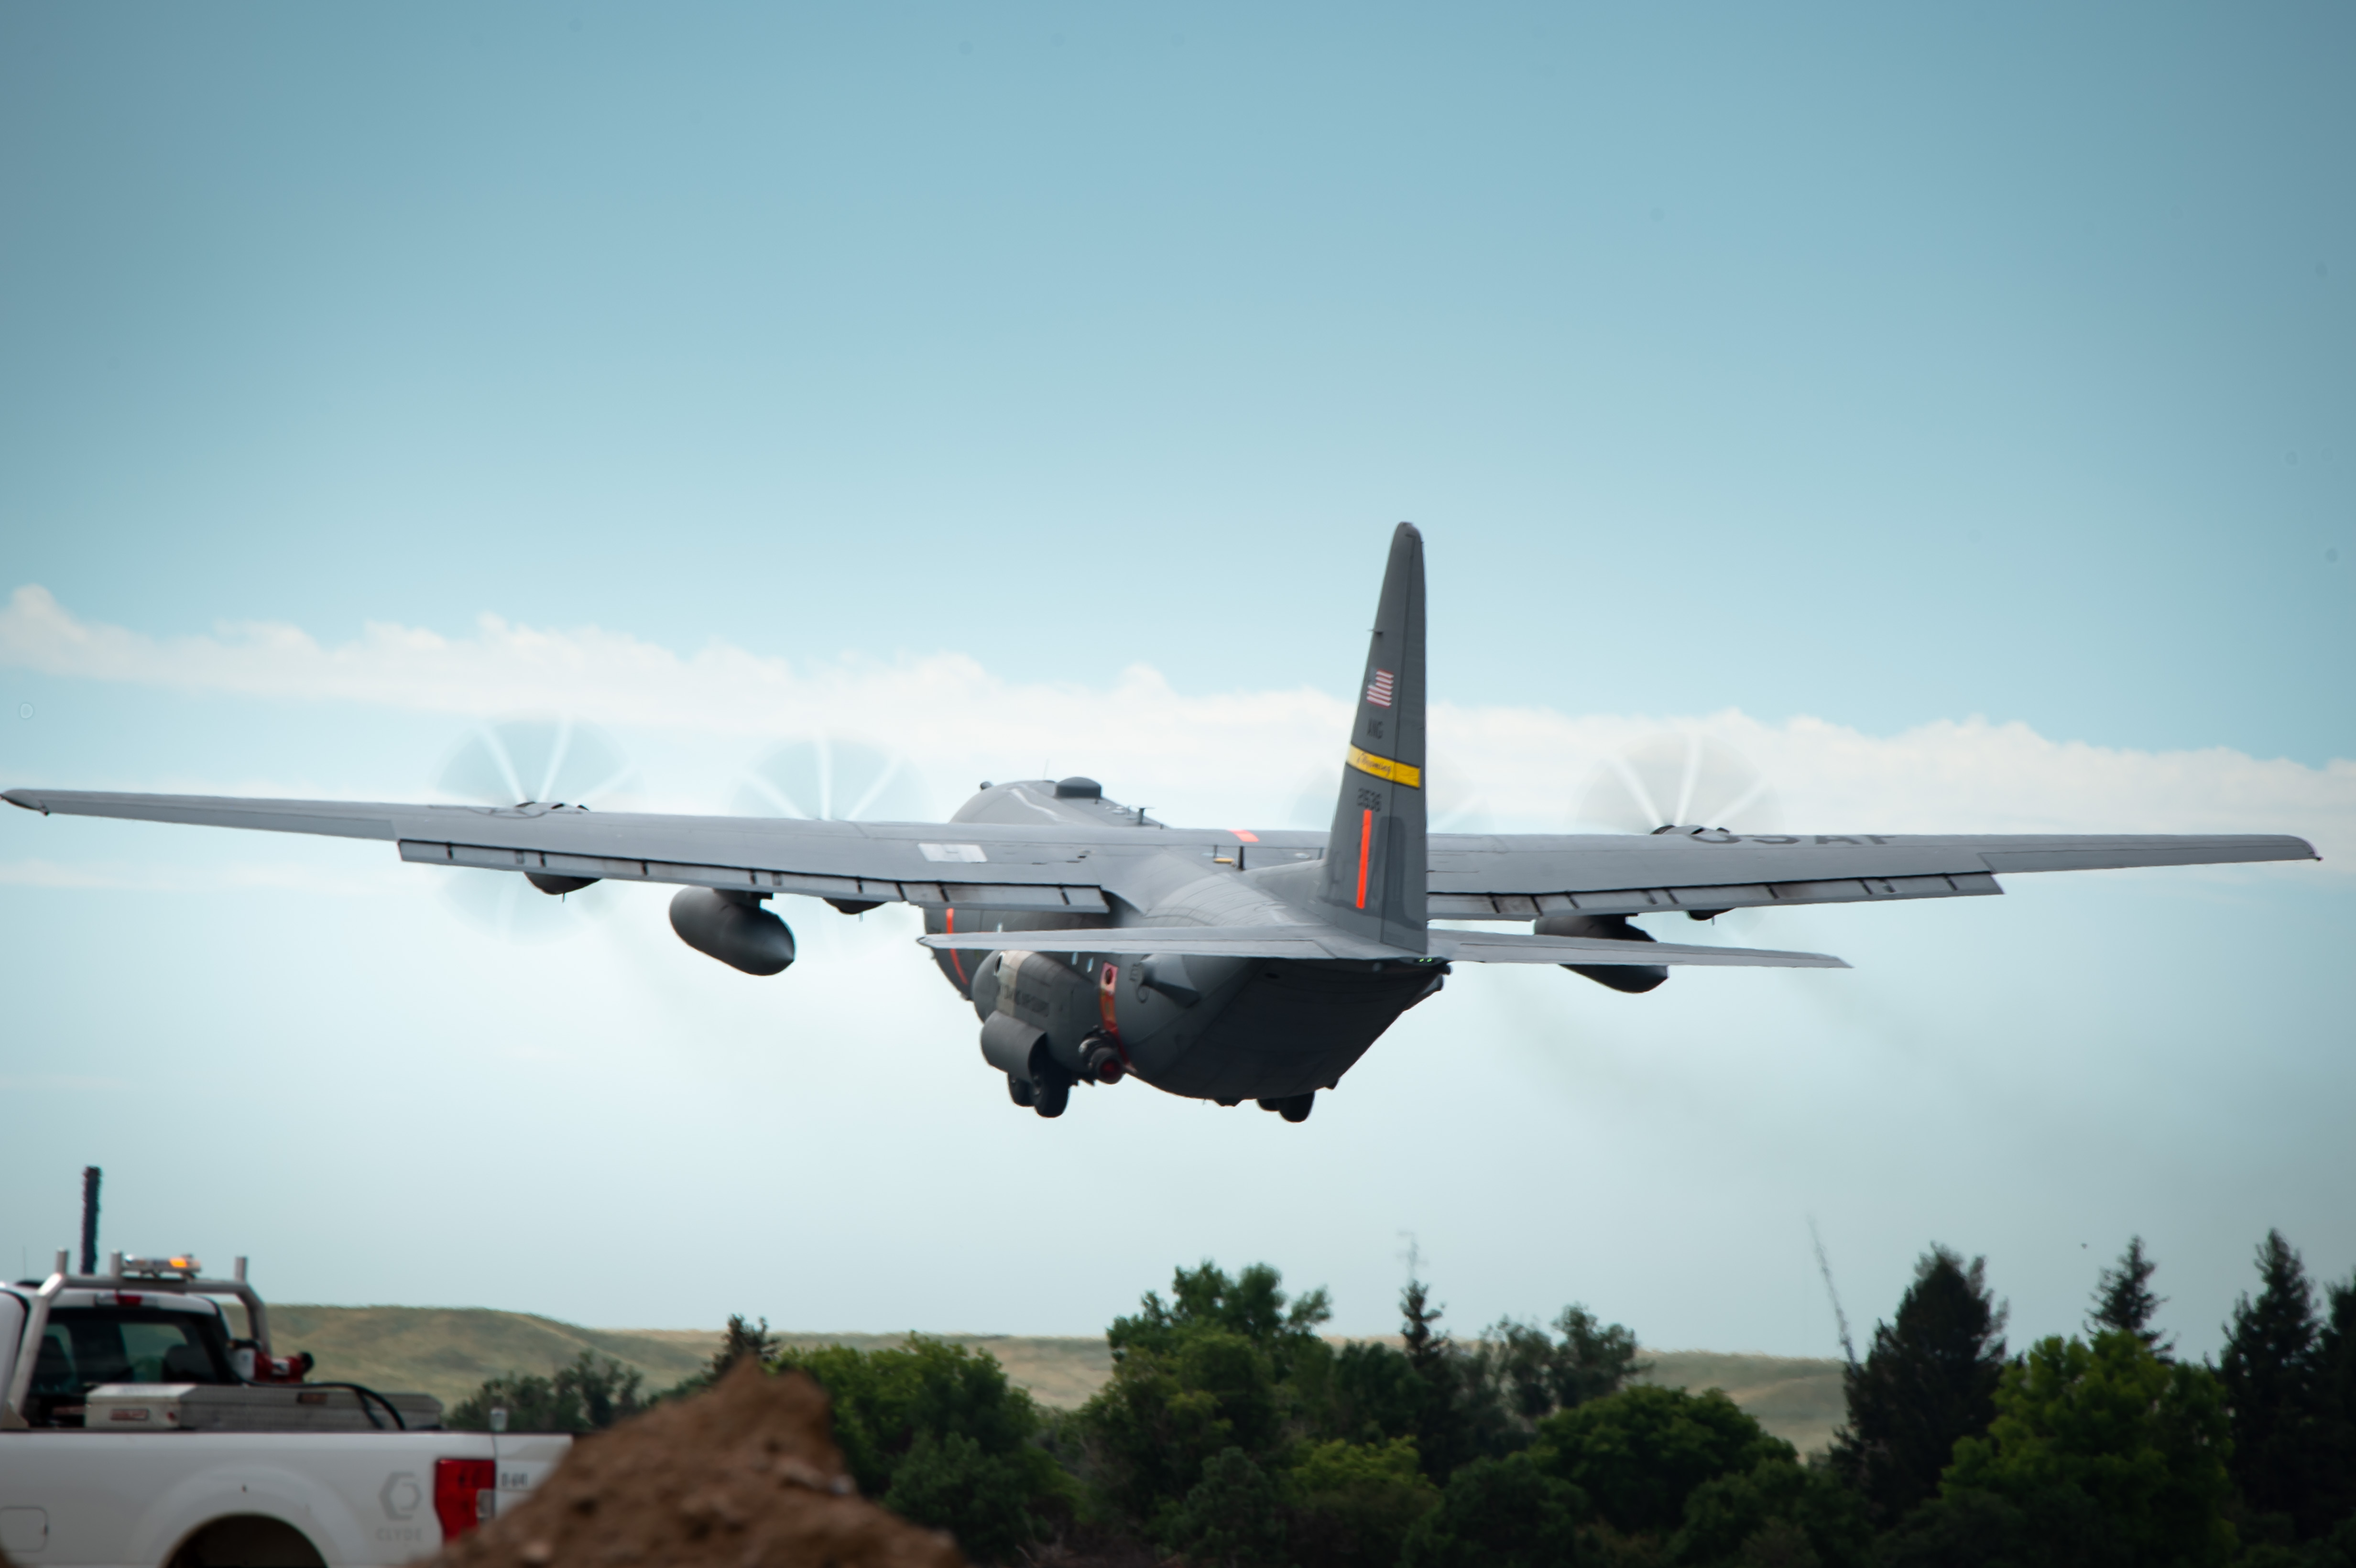 Military C-130s equipped with Modular Airborne Firefighting Systems (MAFFS) mobilized to assist with wildfire suppression efforts. 